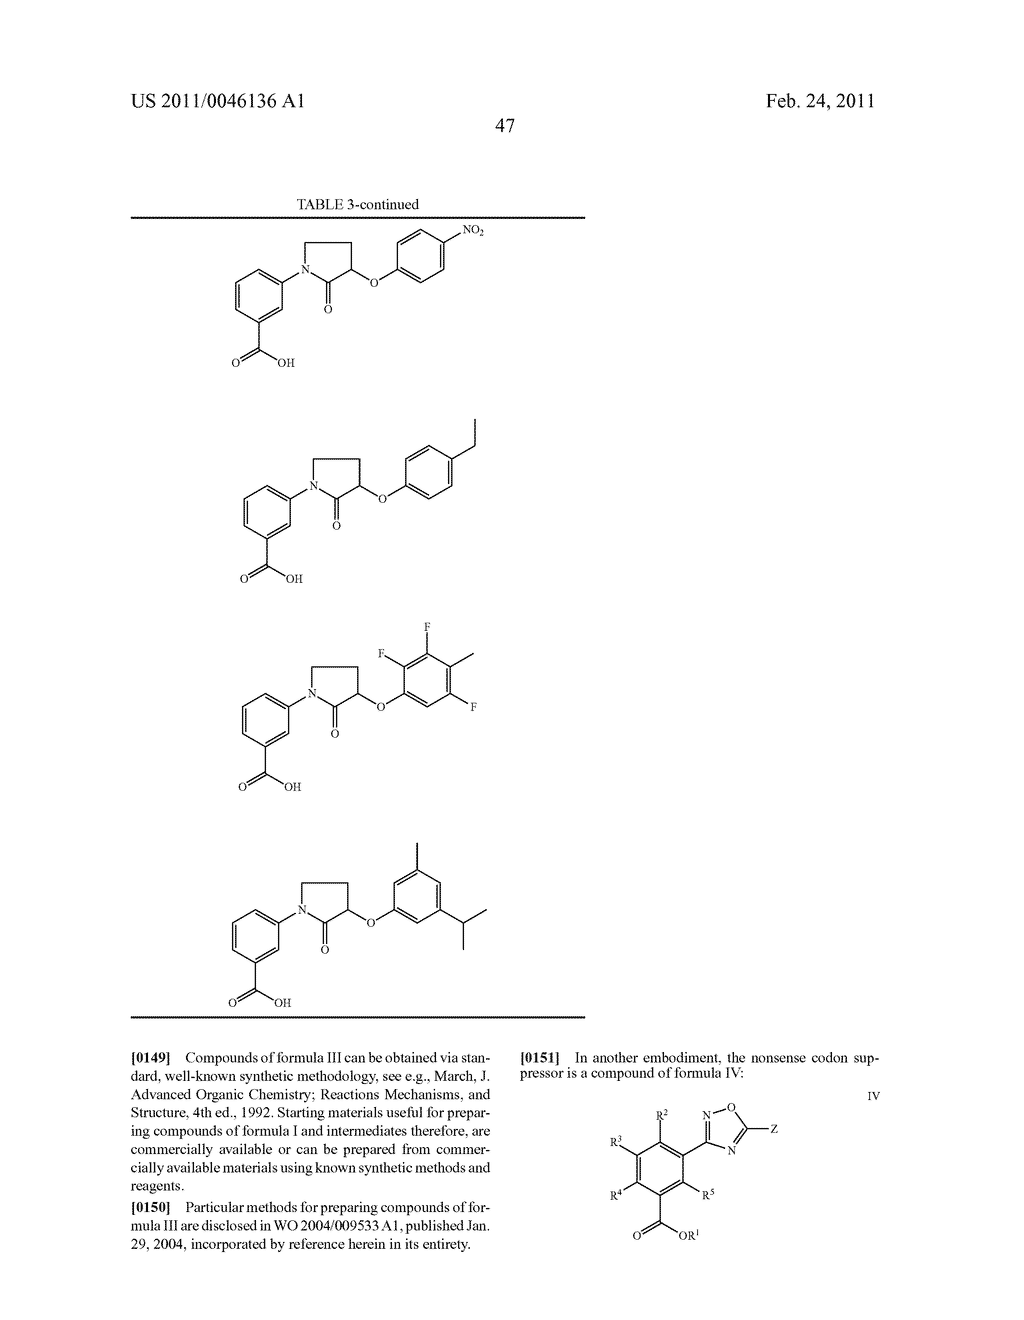 METHODS FOR THE PRODUCTION OF FUNCTIONAL PROTEIN FROM DNA HAVING A NONSENSE MUTATION AND THE TREATMENT OF DISORDERS ASSOCICATED THEREWITH - diagram, schematic, and image 51